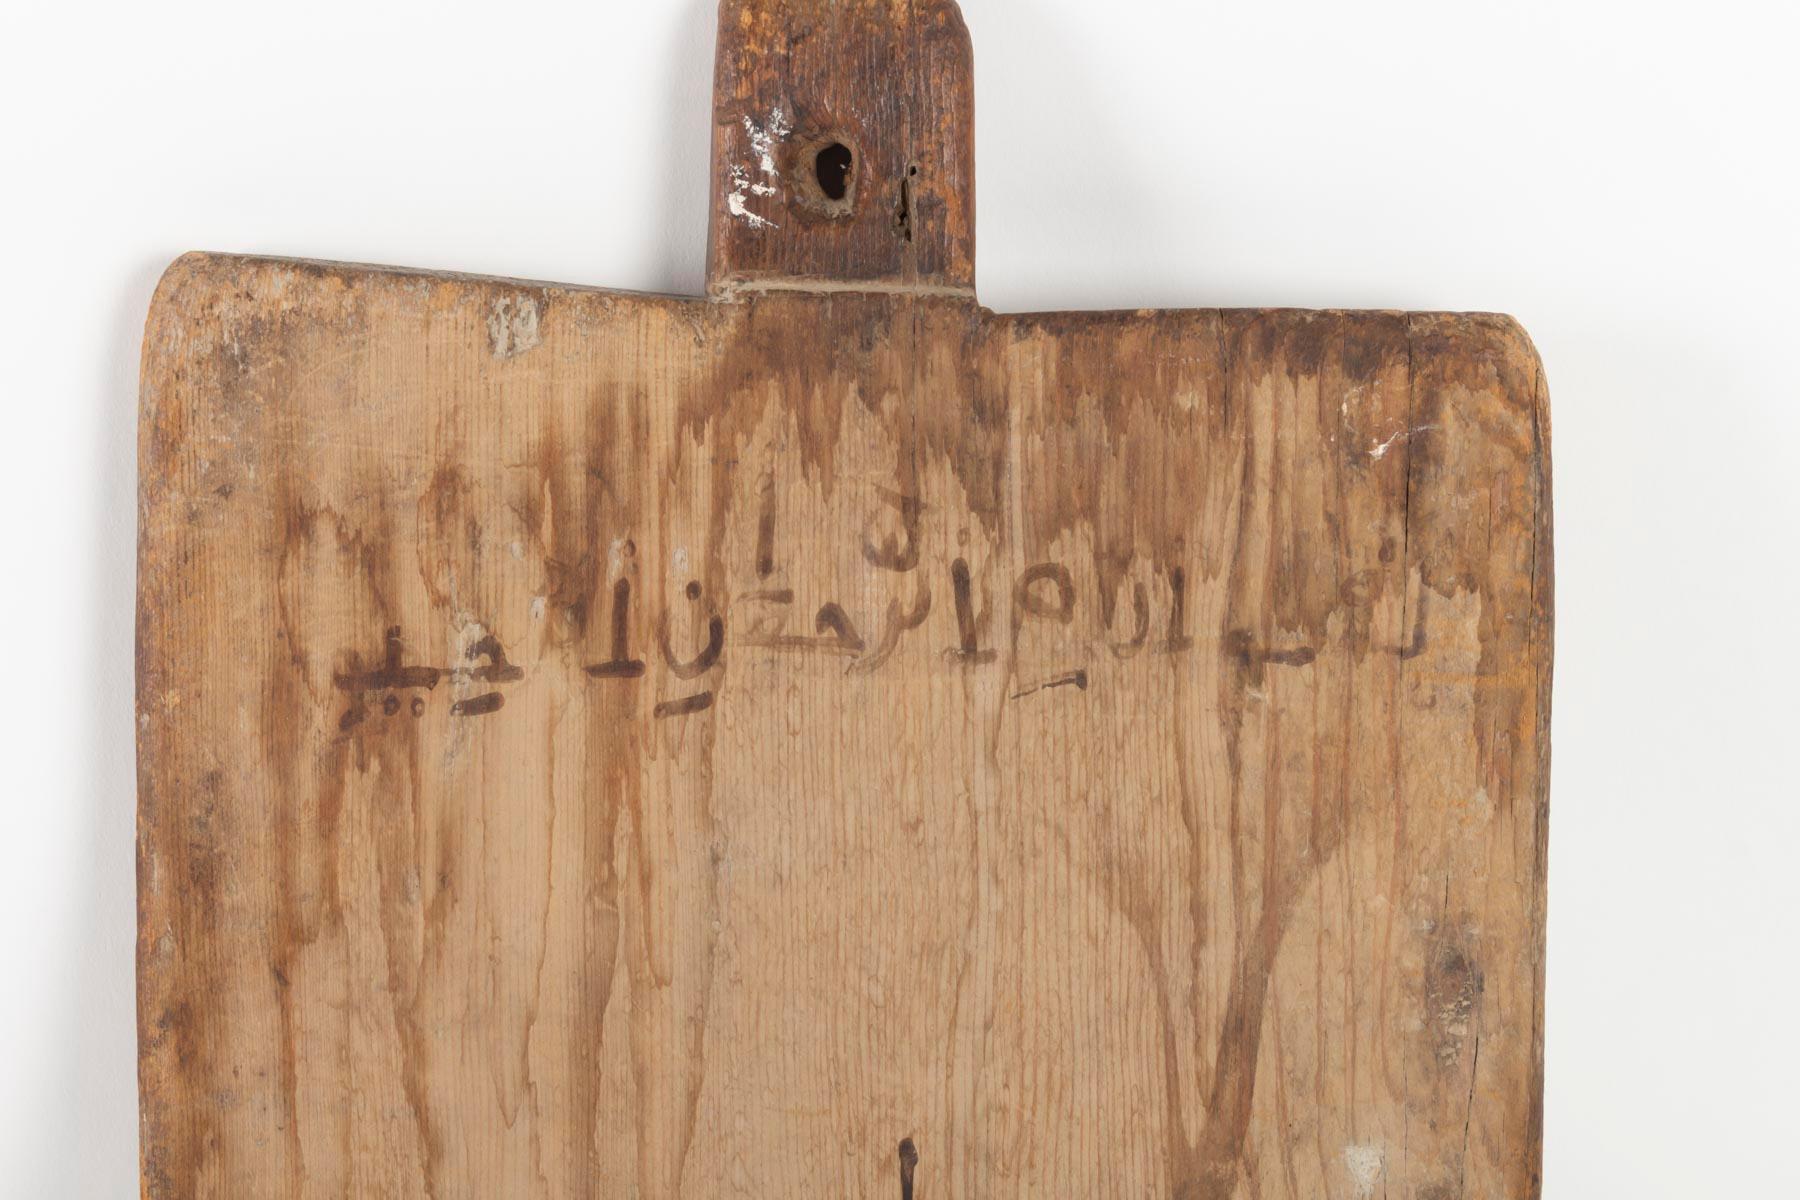 Wooden tray for learning The Quran, 19th century
Measures: H 44cm, W 20cm, D 3cm.